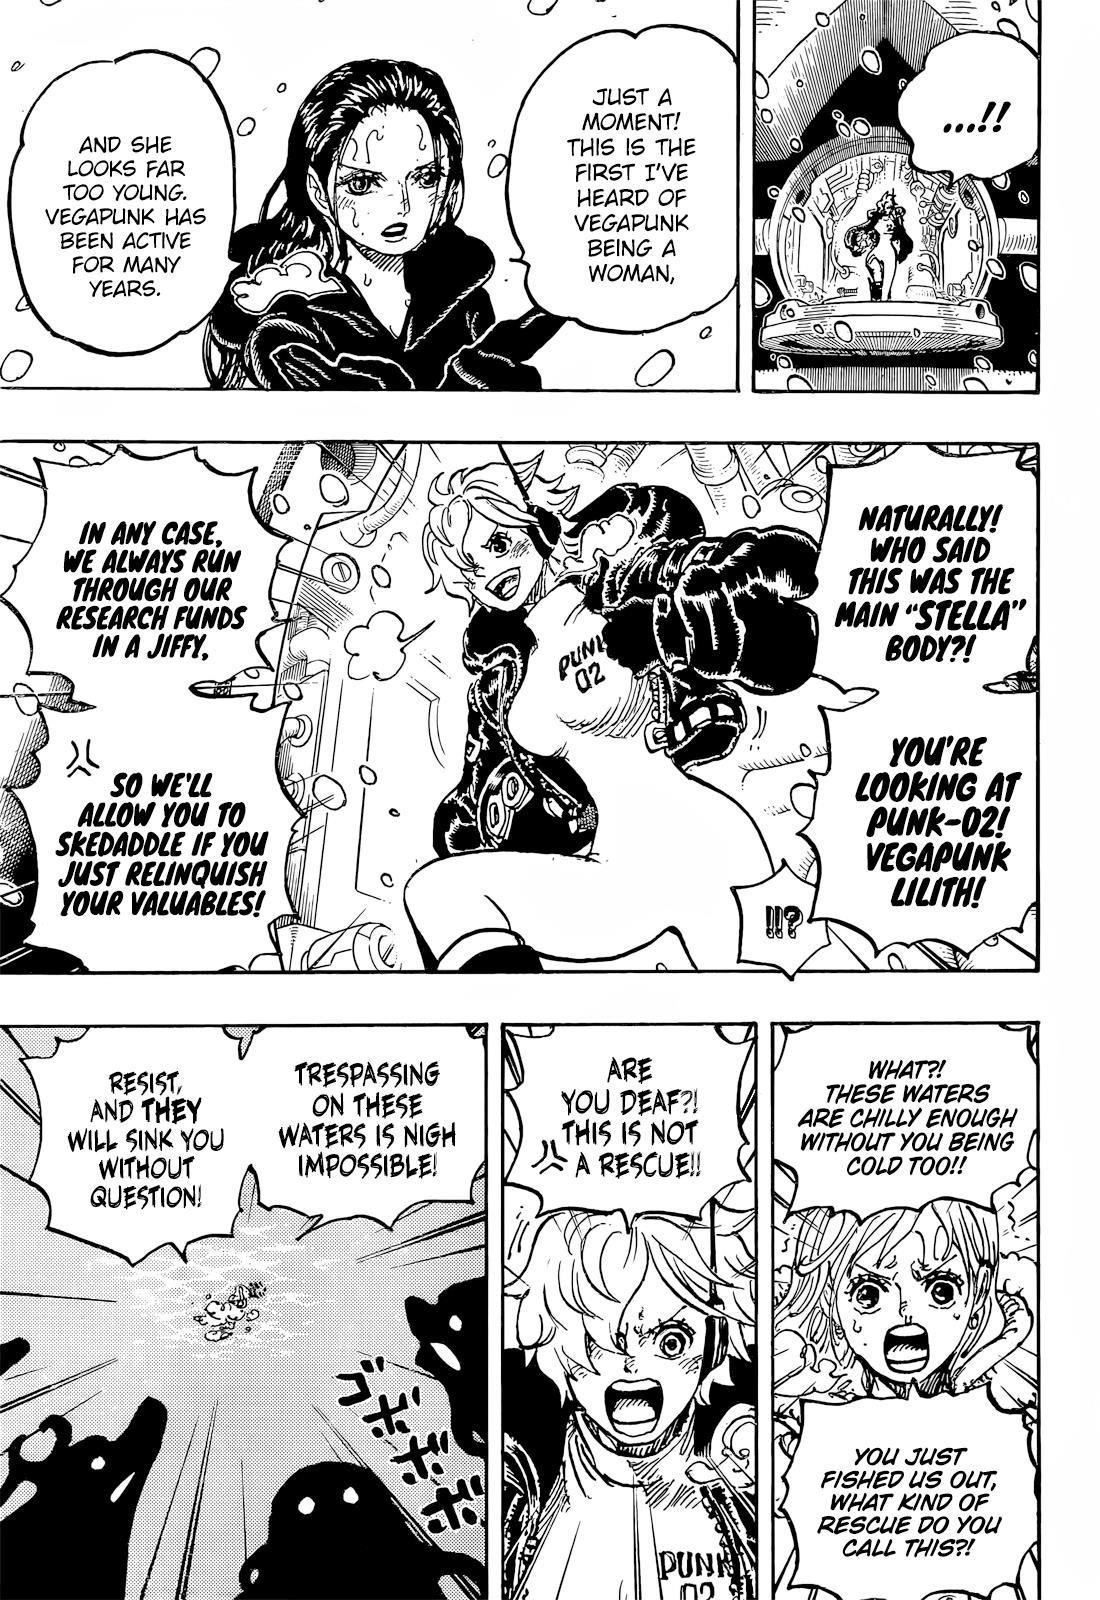 One Piece Chapter 1062 Spoilers & Brief Summary